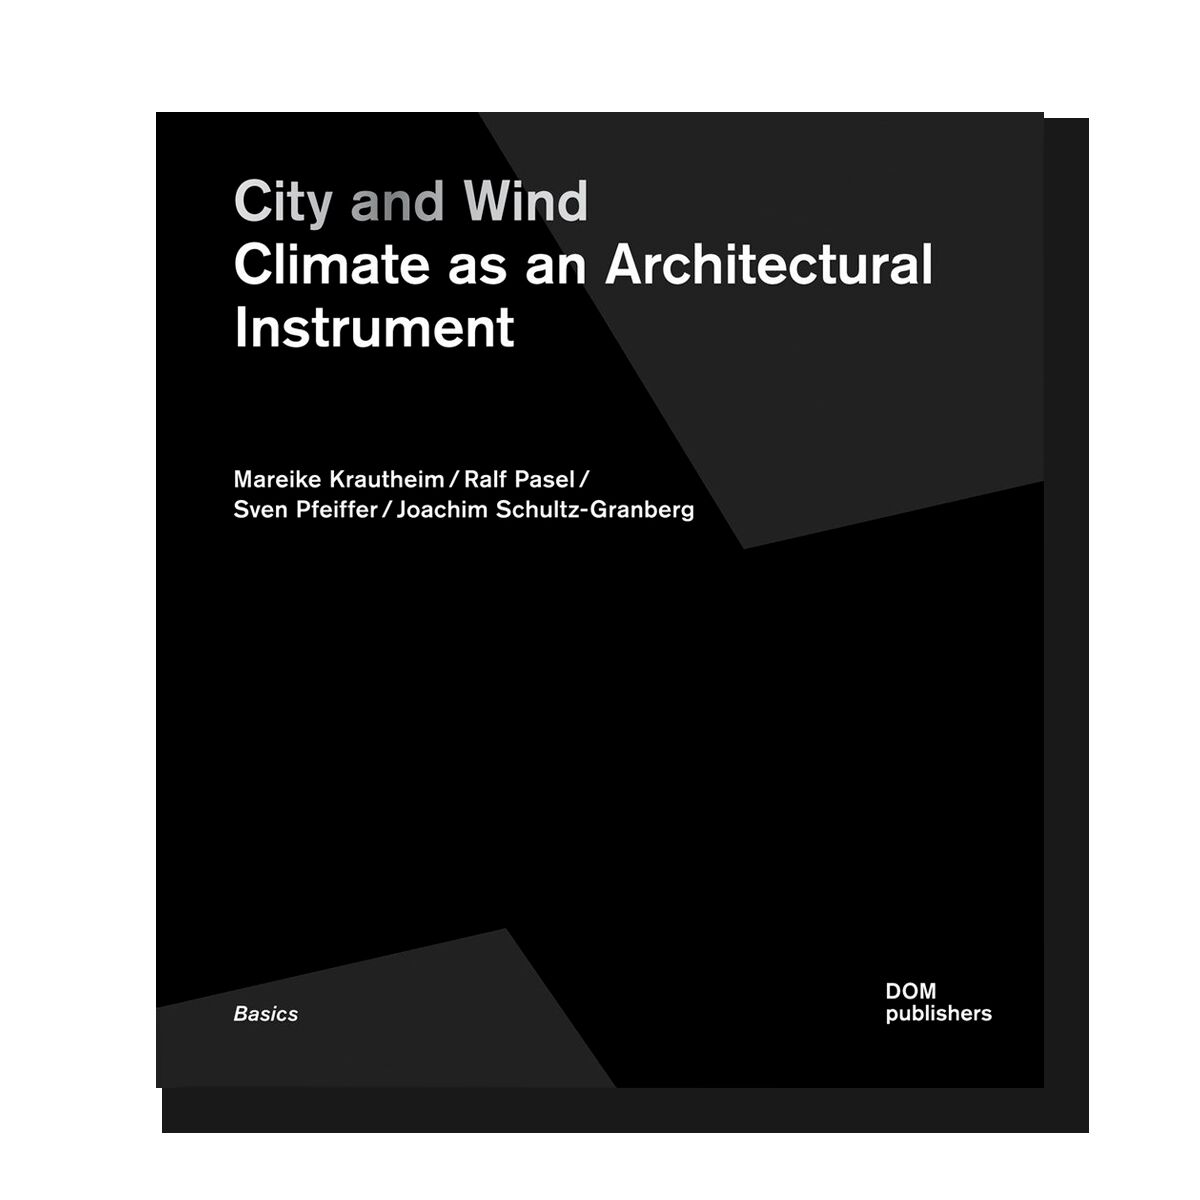 City and Wind: Climate as an Architectural Instrument